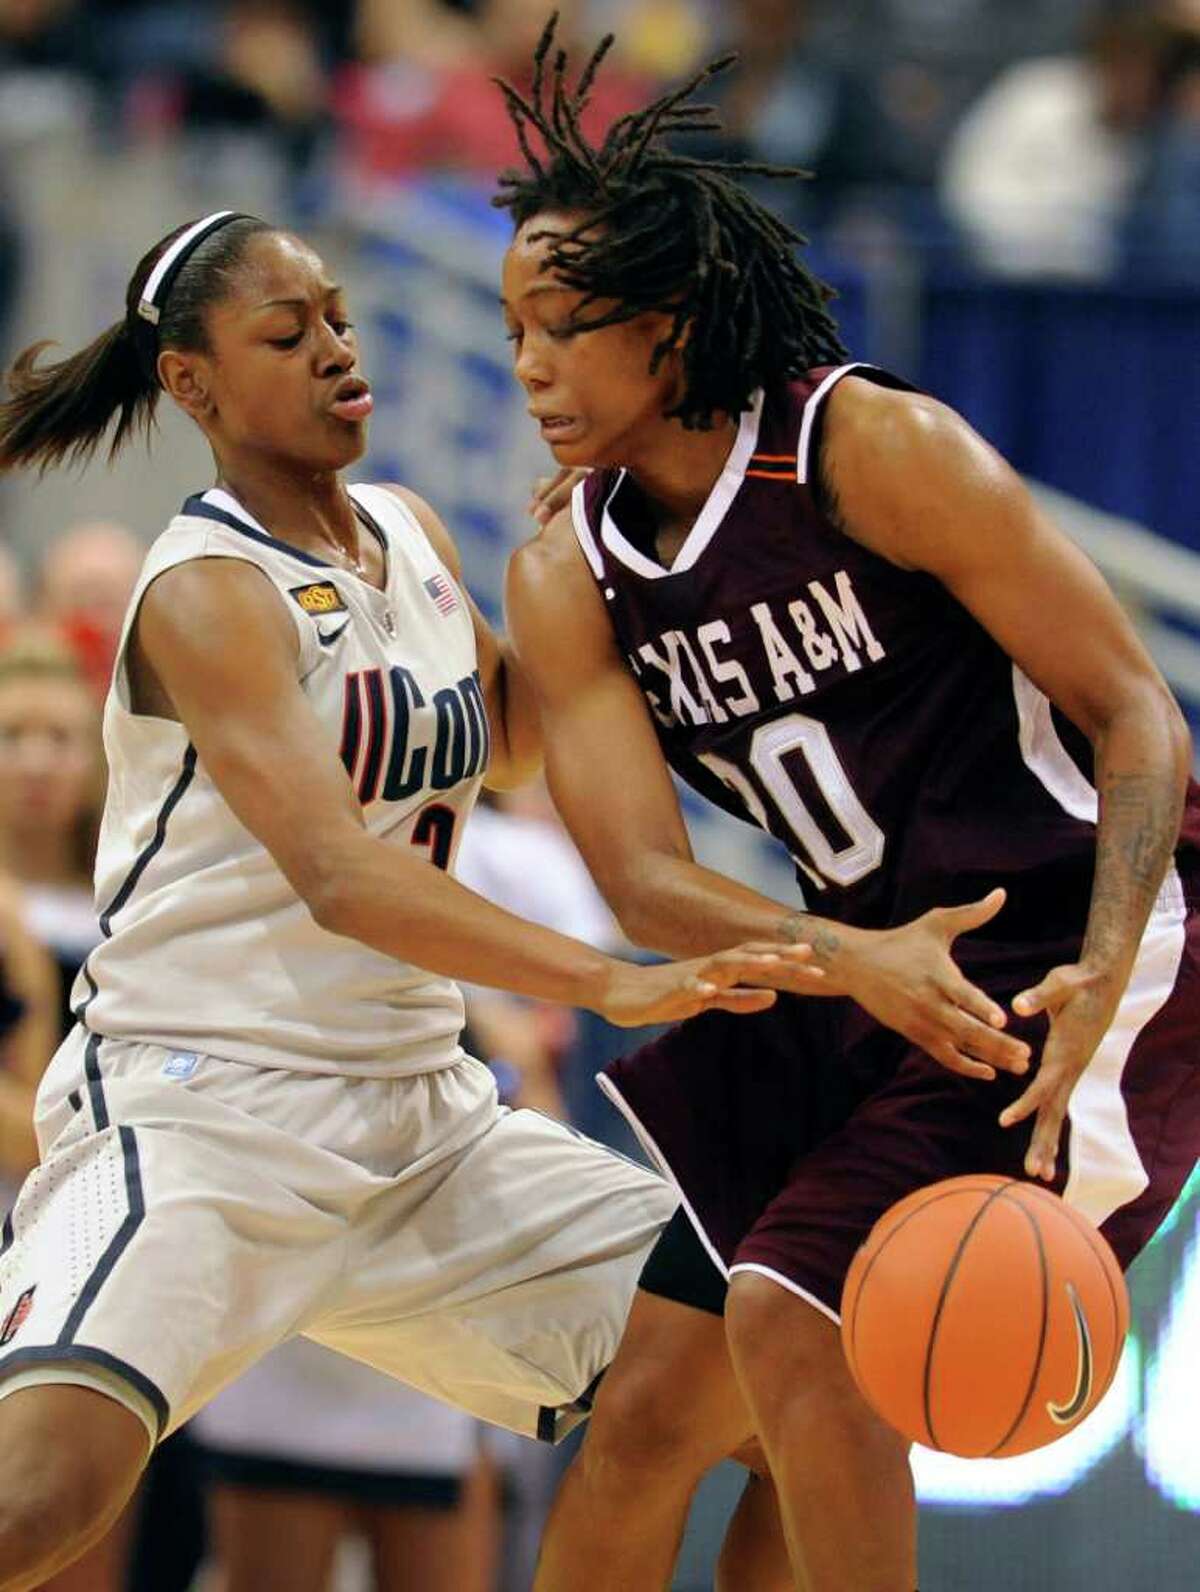 Connecticut's Tiffany Hayes, left, pressures Texas A&M's Tyra White, right in the first half of an NCAA college basketball game in Hartford, Conn., Tuesday, Dec. 6, 2011. (AP Photo/Jessica Hill)